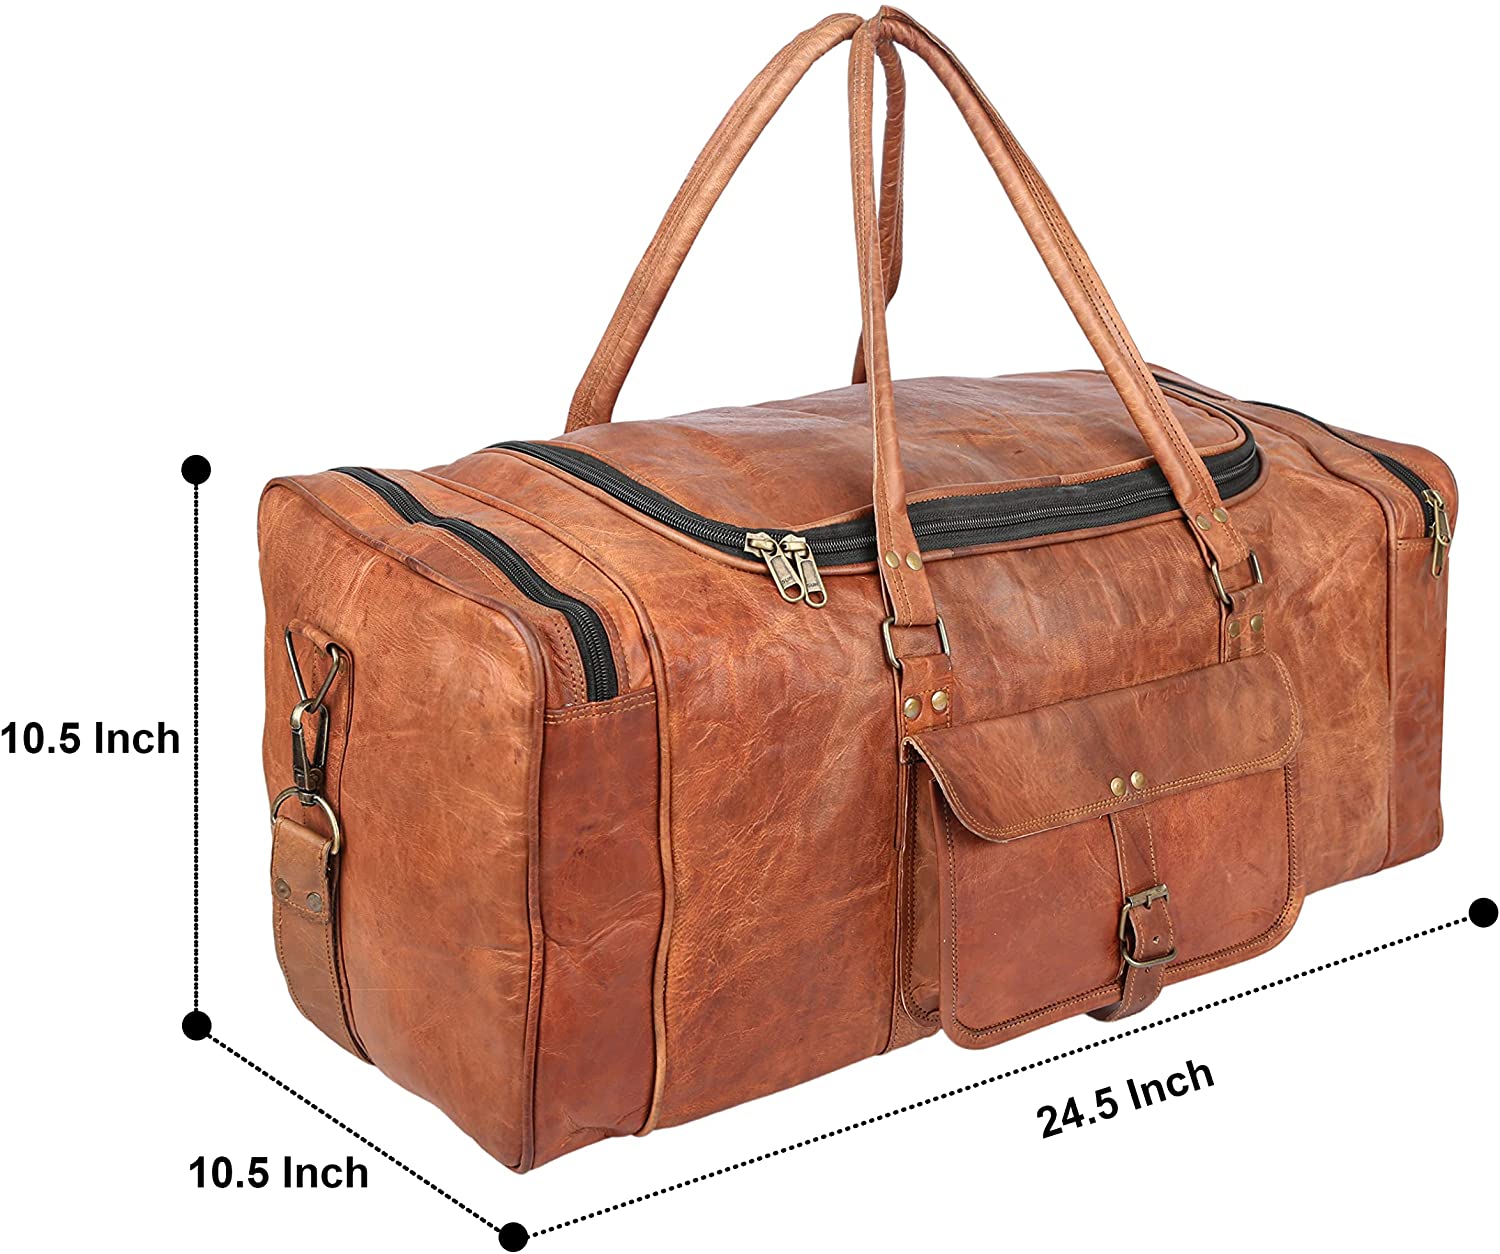 leather duffle bag with 100% pure leather